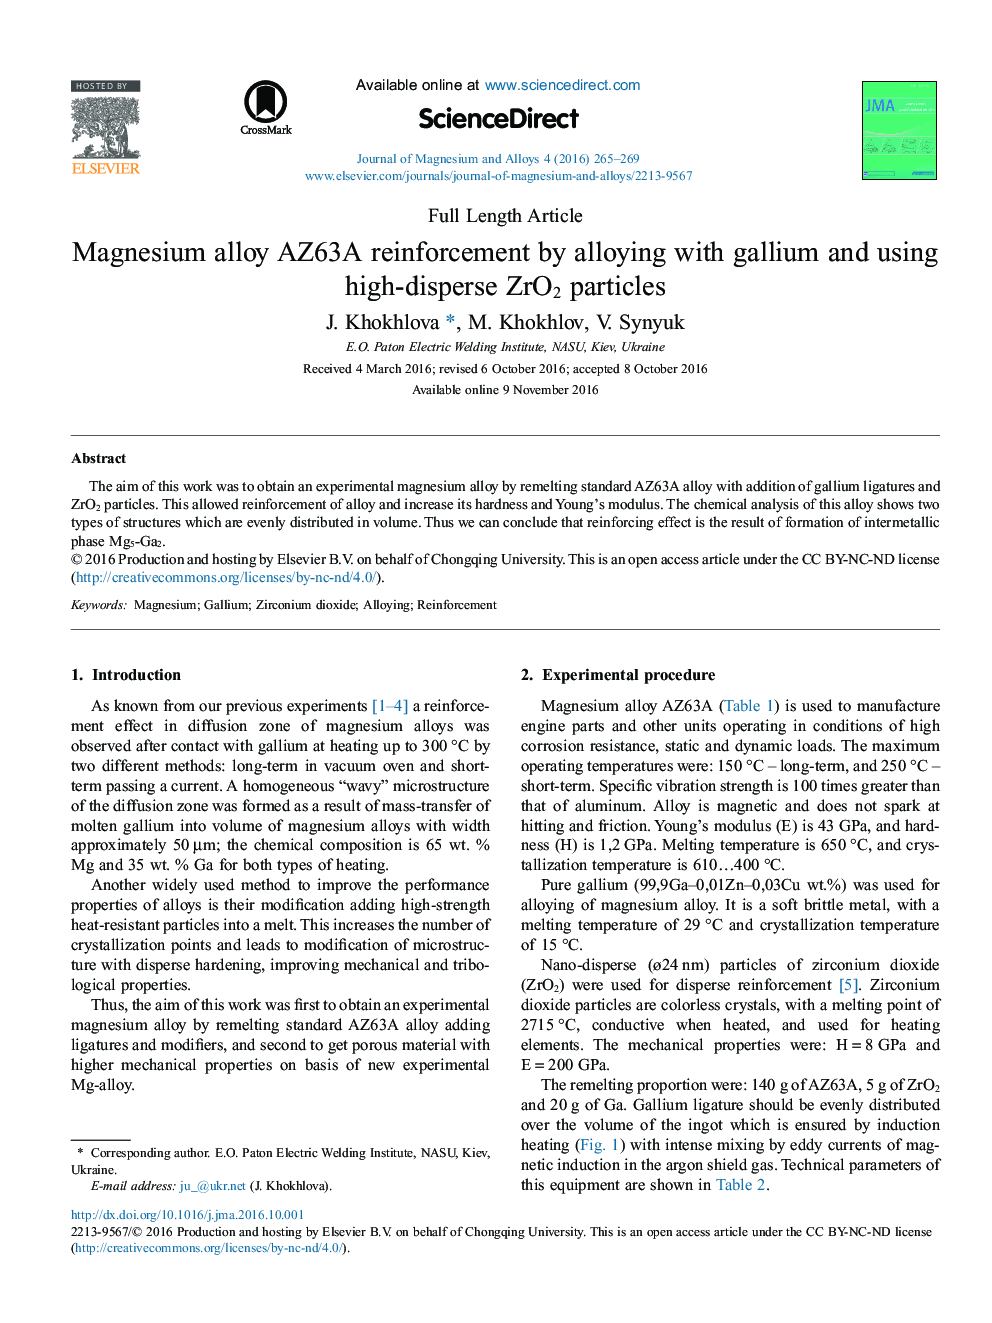 Magnesium alloy AZ63A reinforcement by alloying with gallium and using high-disperse ZrO2 particles